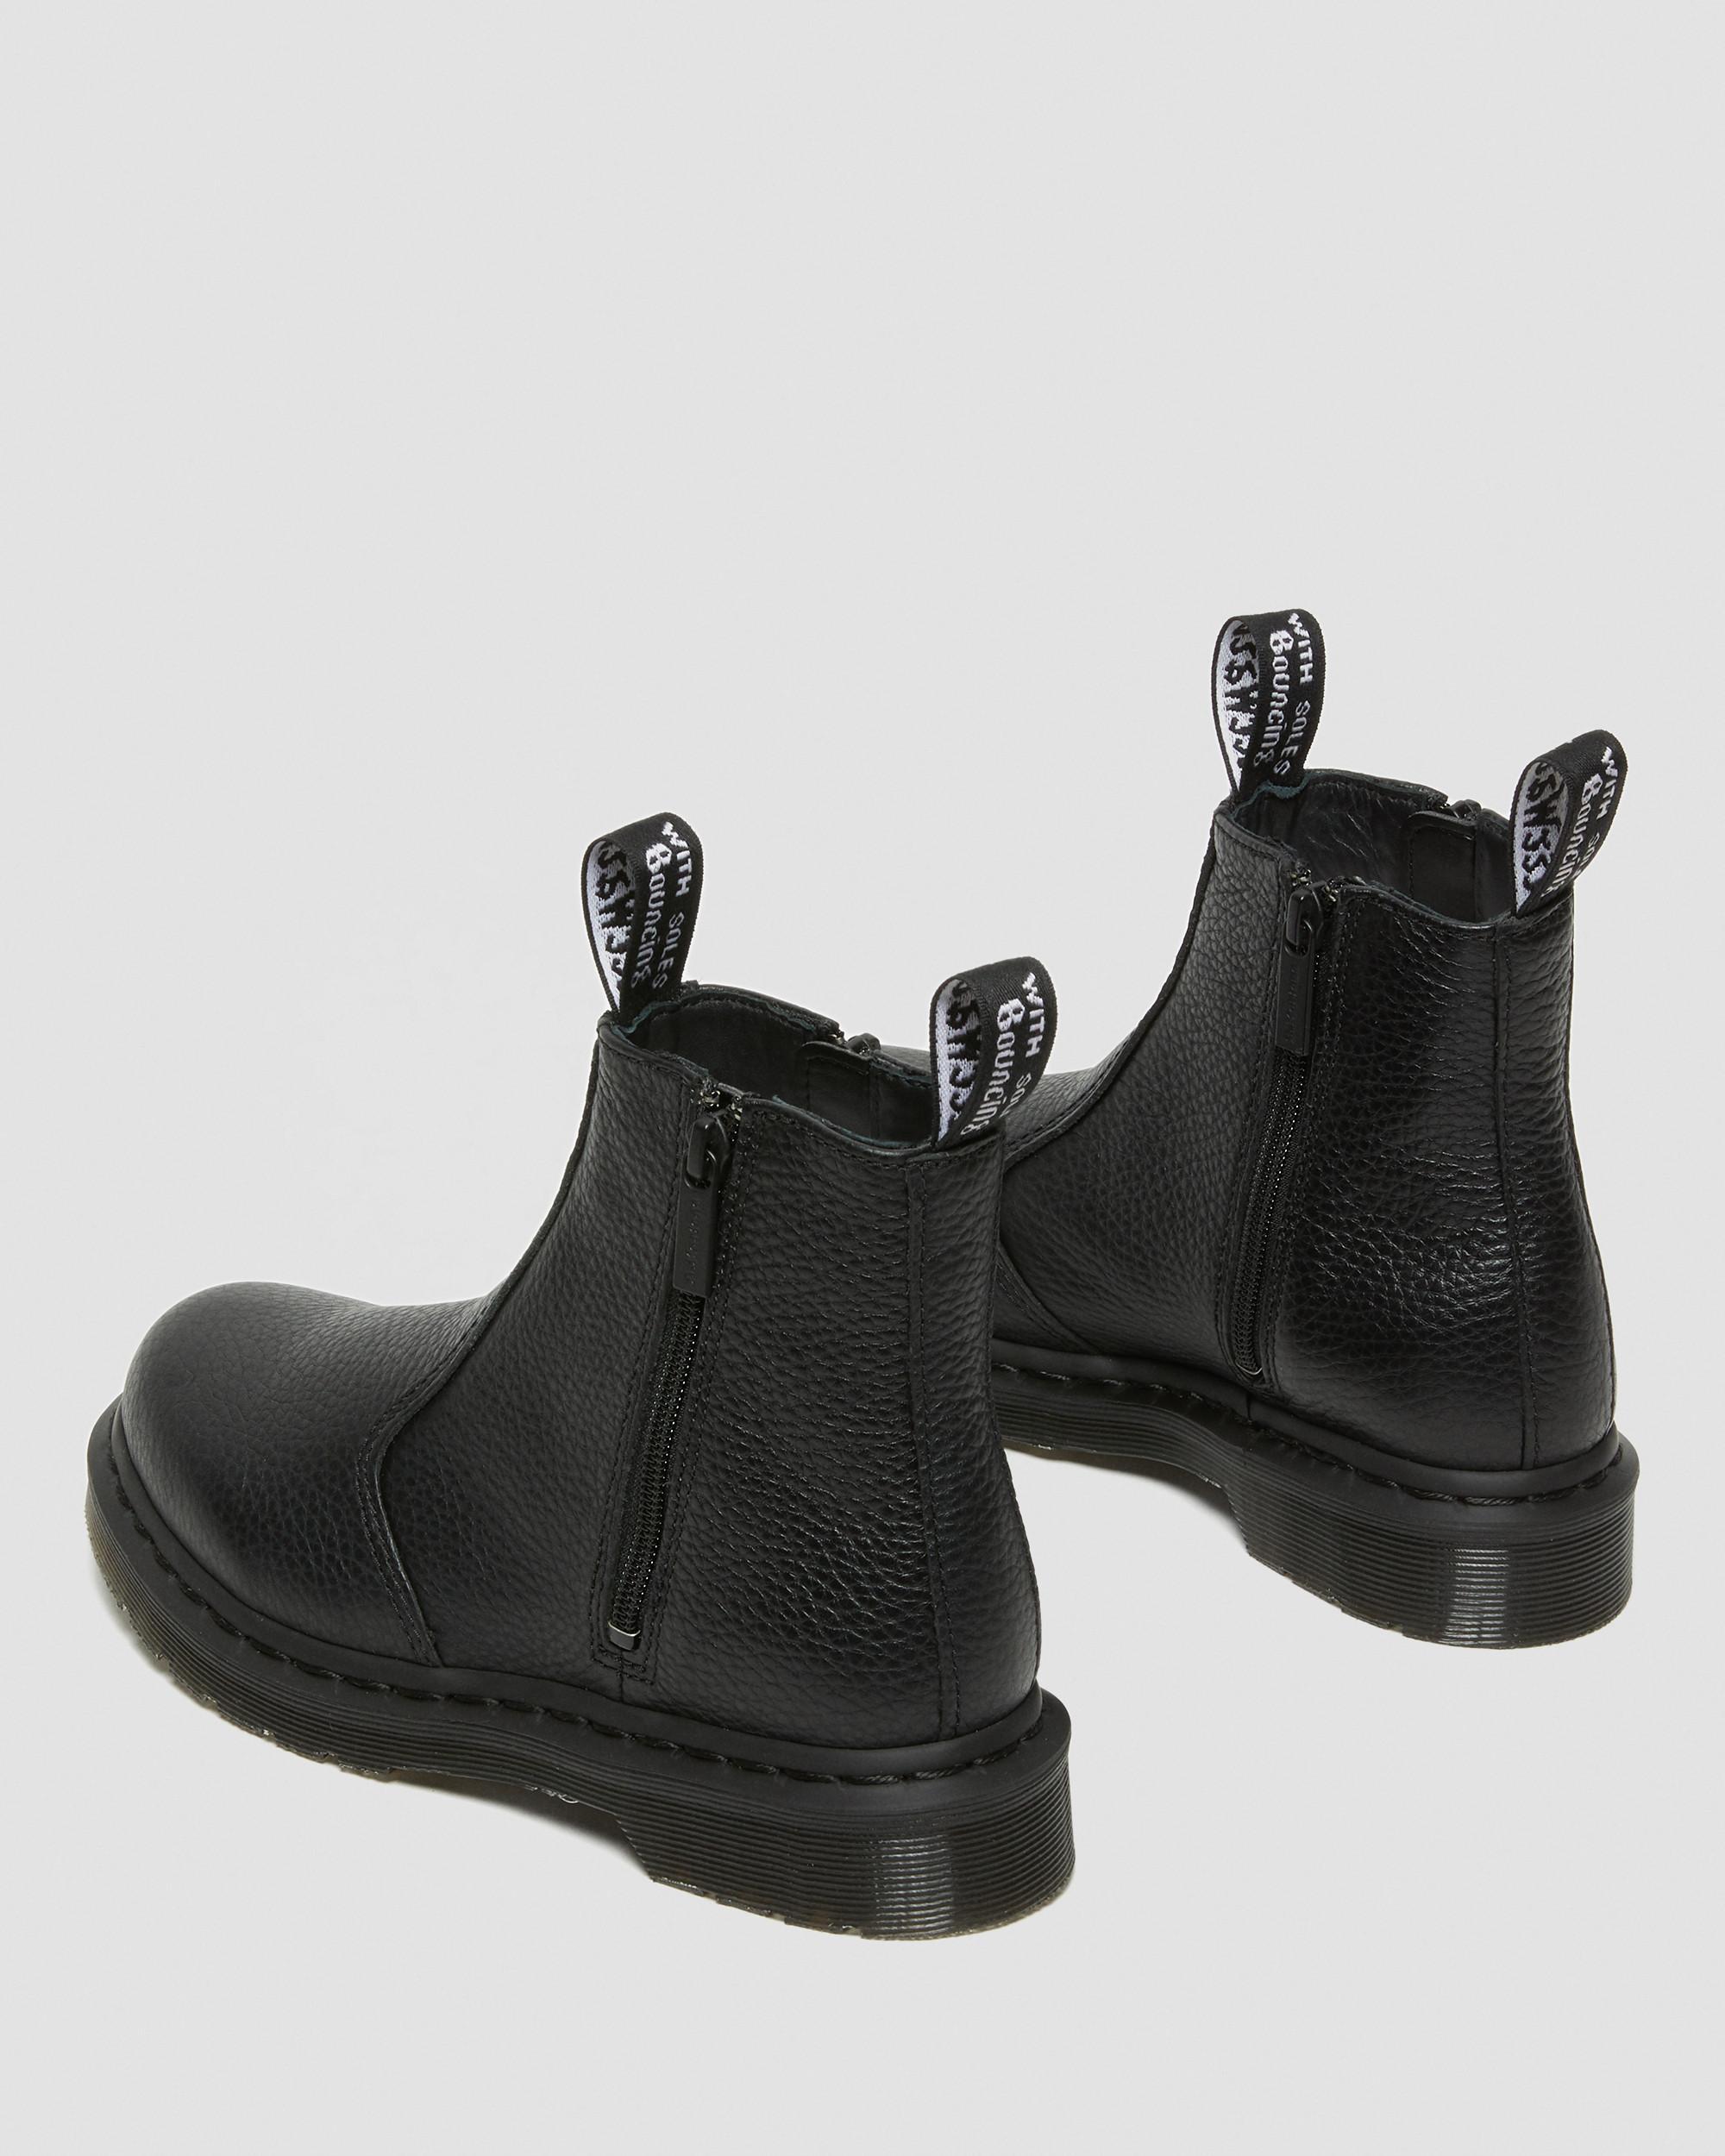 Dr. Martens 2976 With Zips Leather Chelsea Boots in Black | Lyst UK